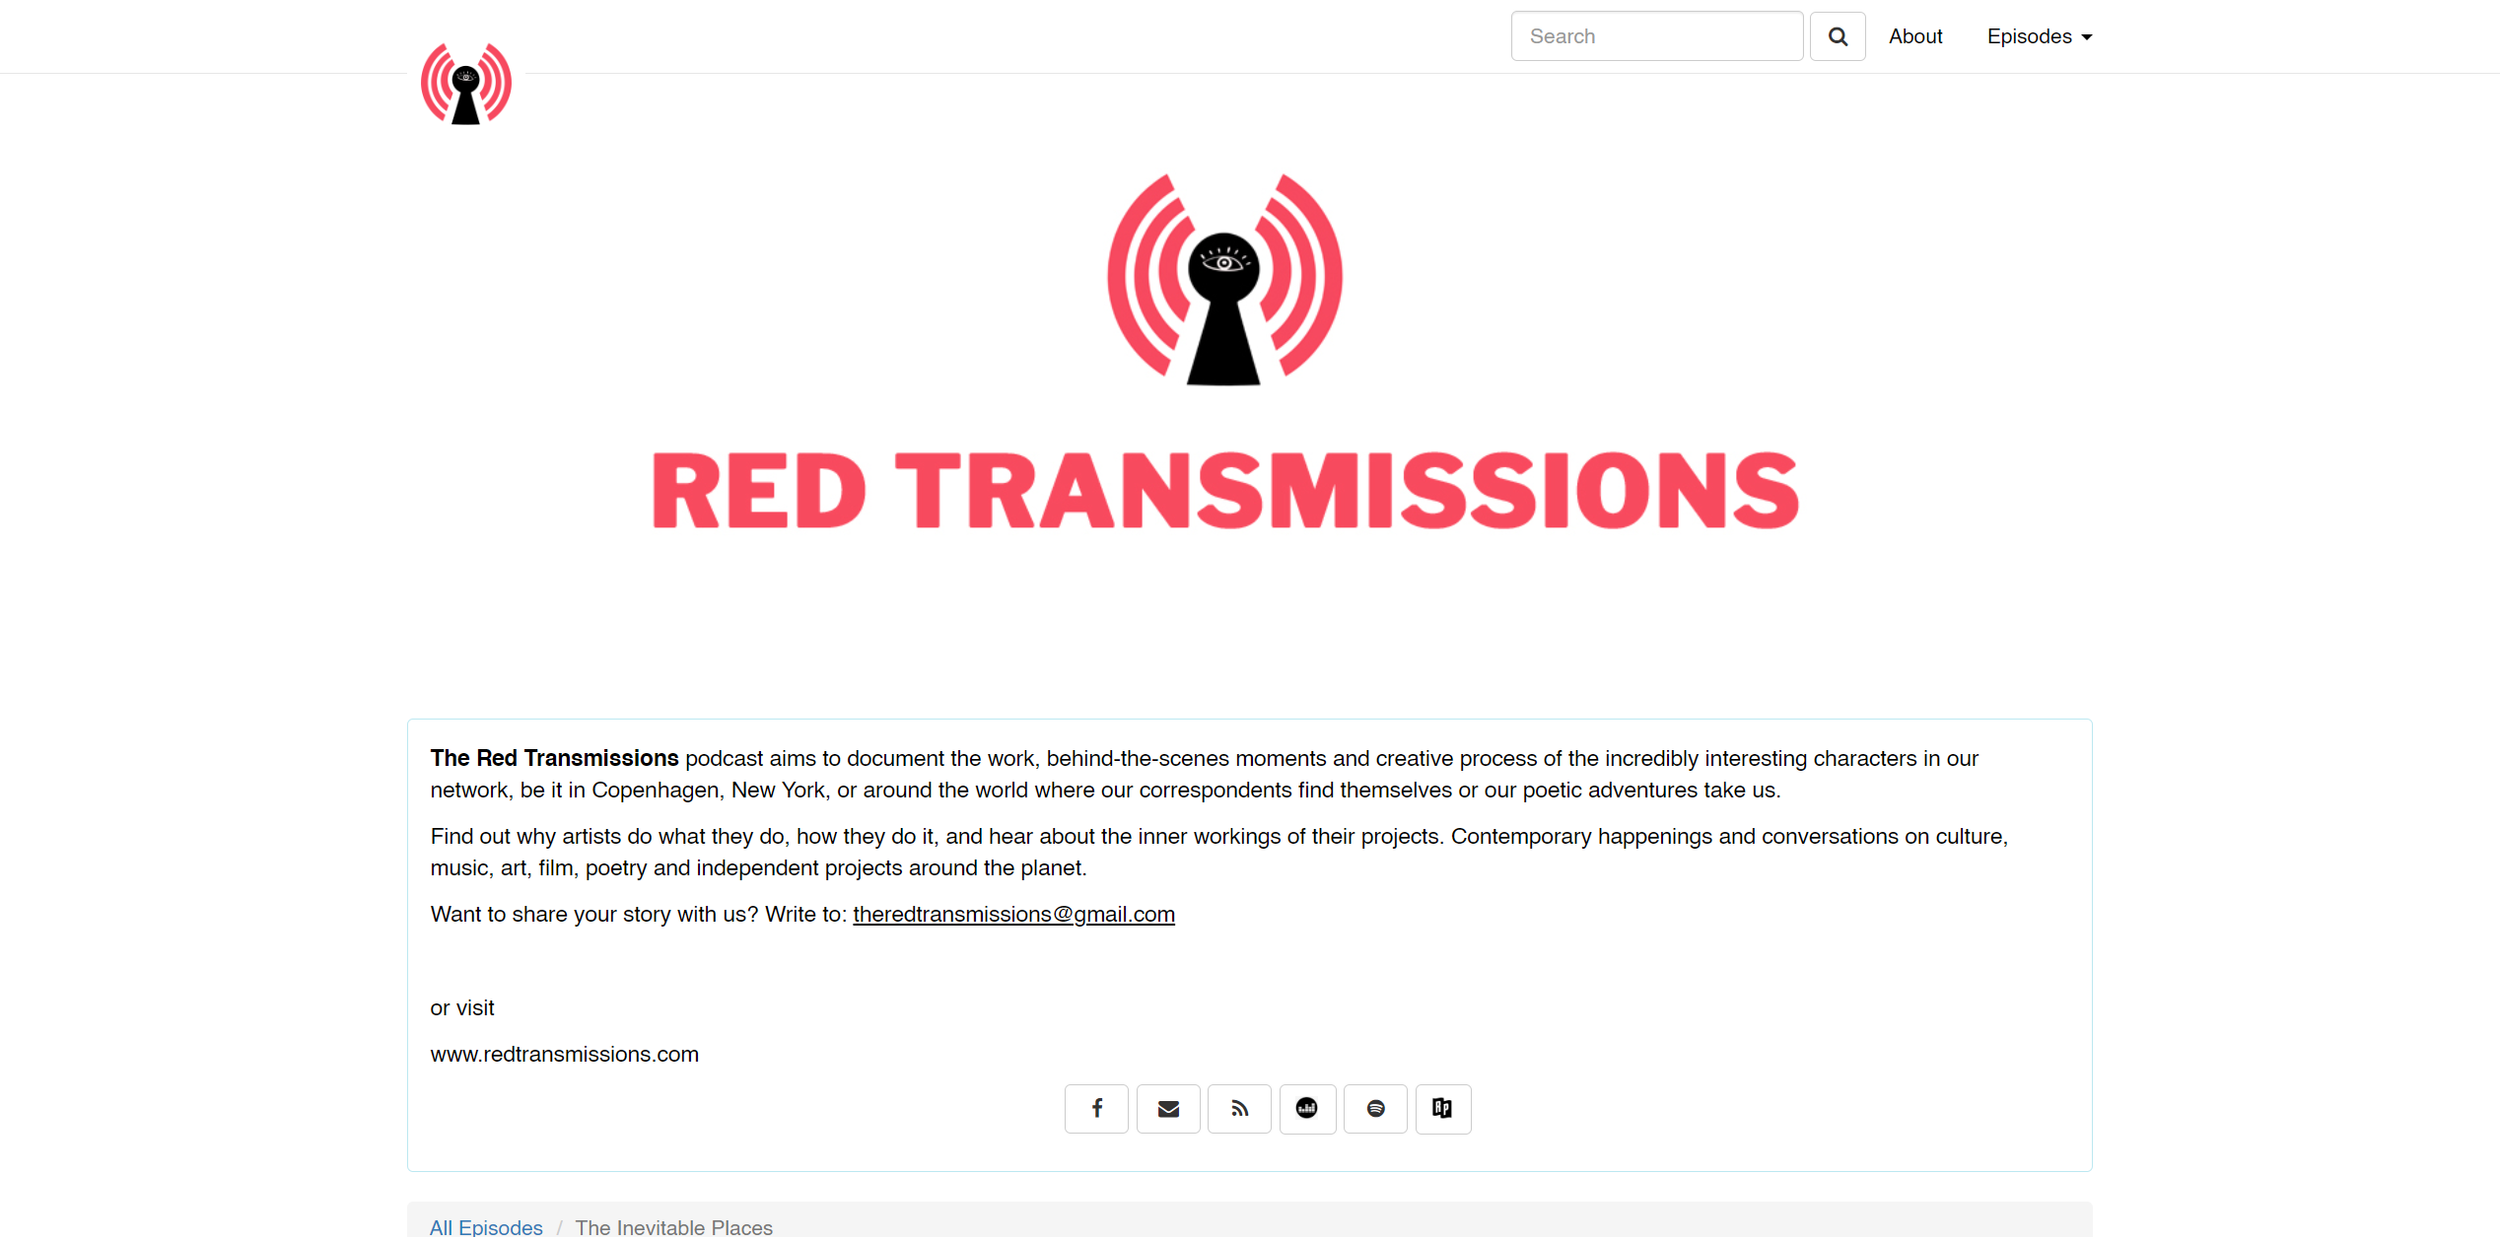 Red Transmissions, podcast: Author Elizabeth Torres and Per Adolfsen, talks about art and life